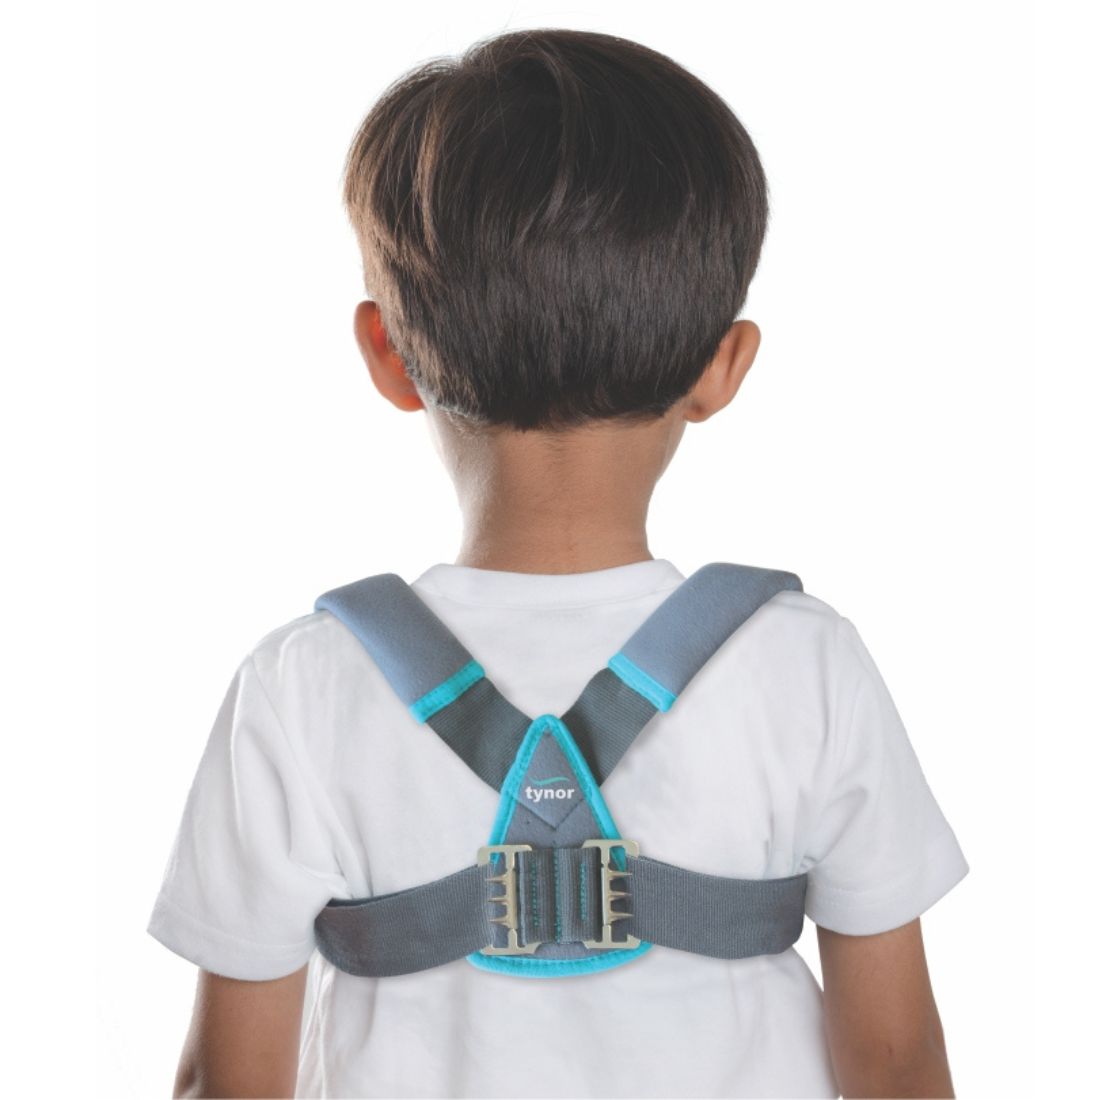 scientifically designed to immobilize, compress and ensure linear union of fractures involving the clavicle bone. It is used where neither neurovascular disturbances are severe, nor surgery is required. Buy it now for best price in India 